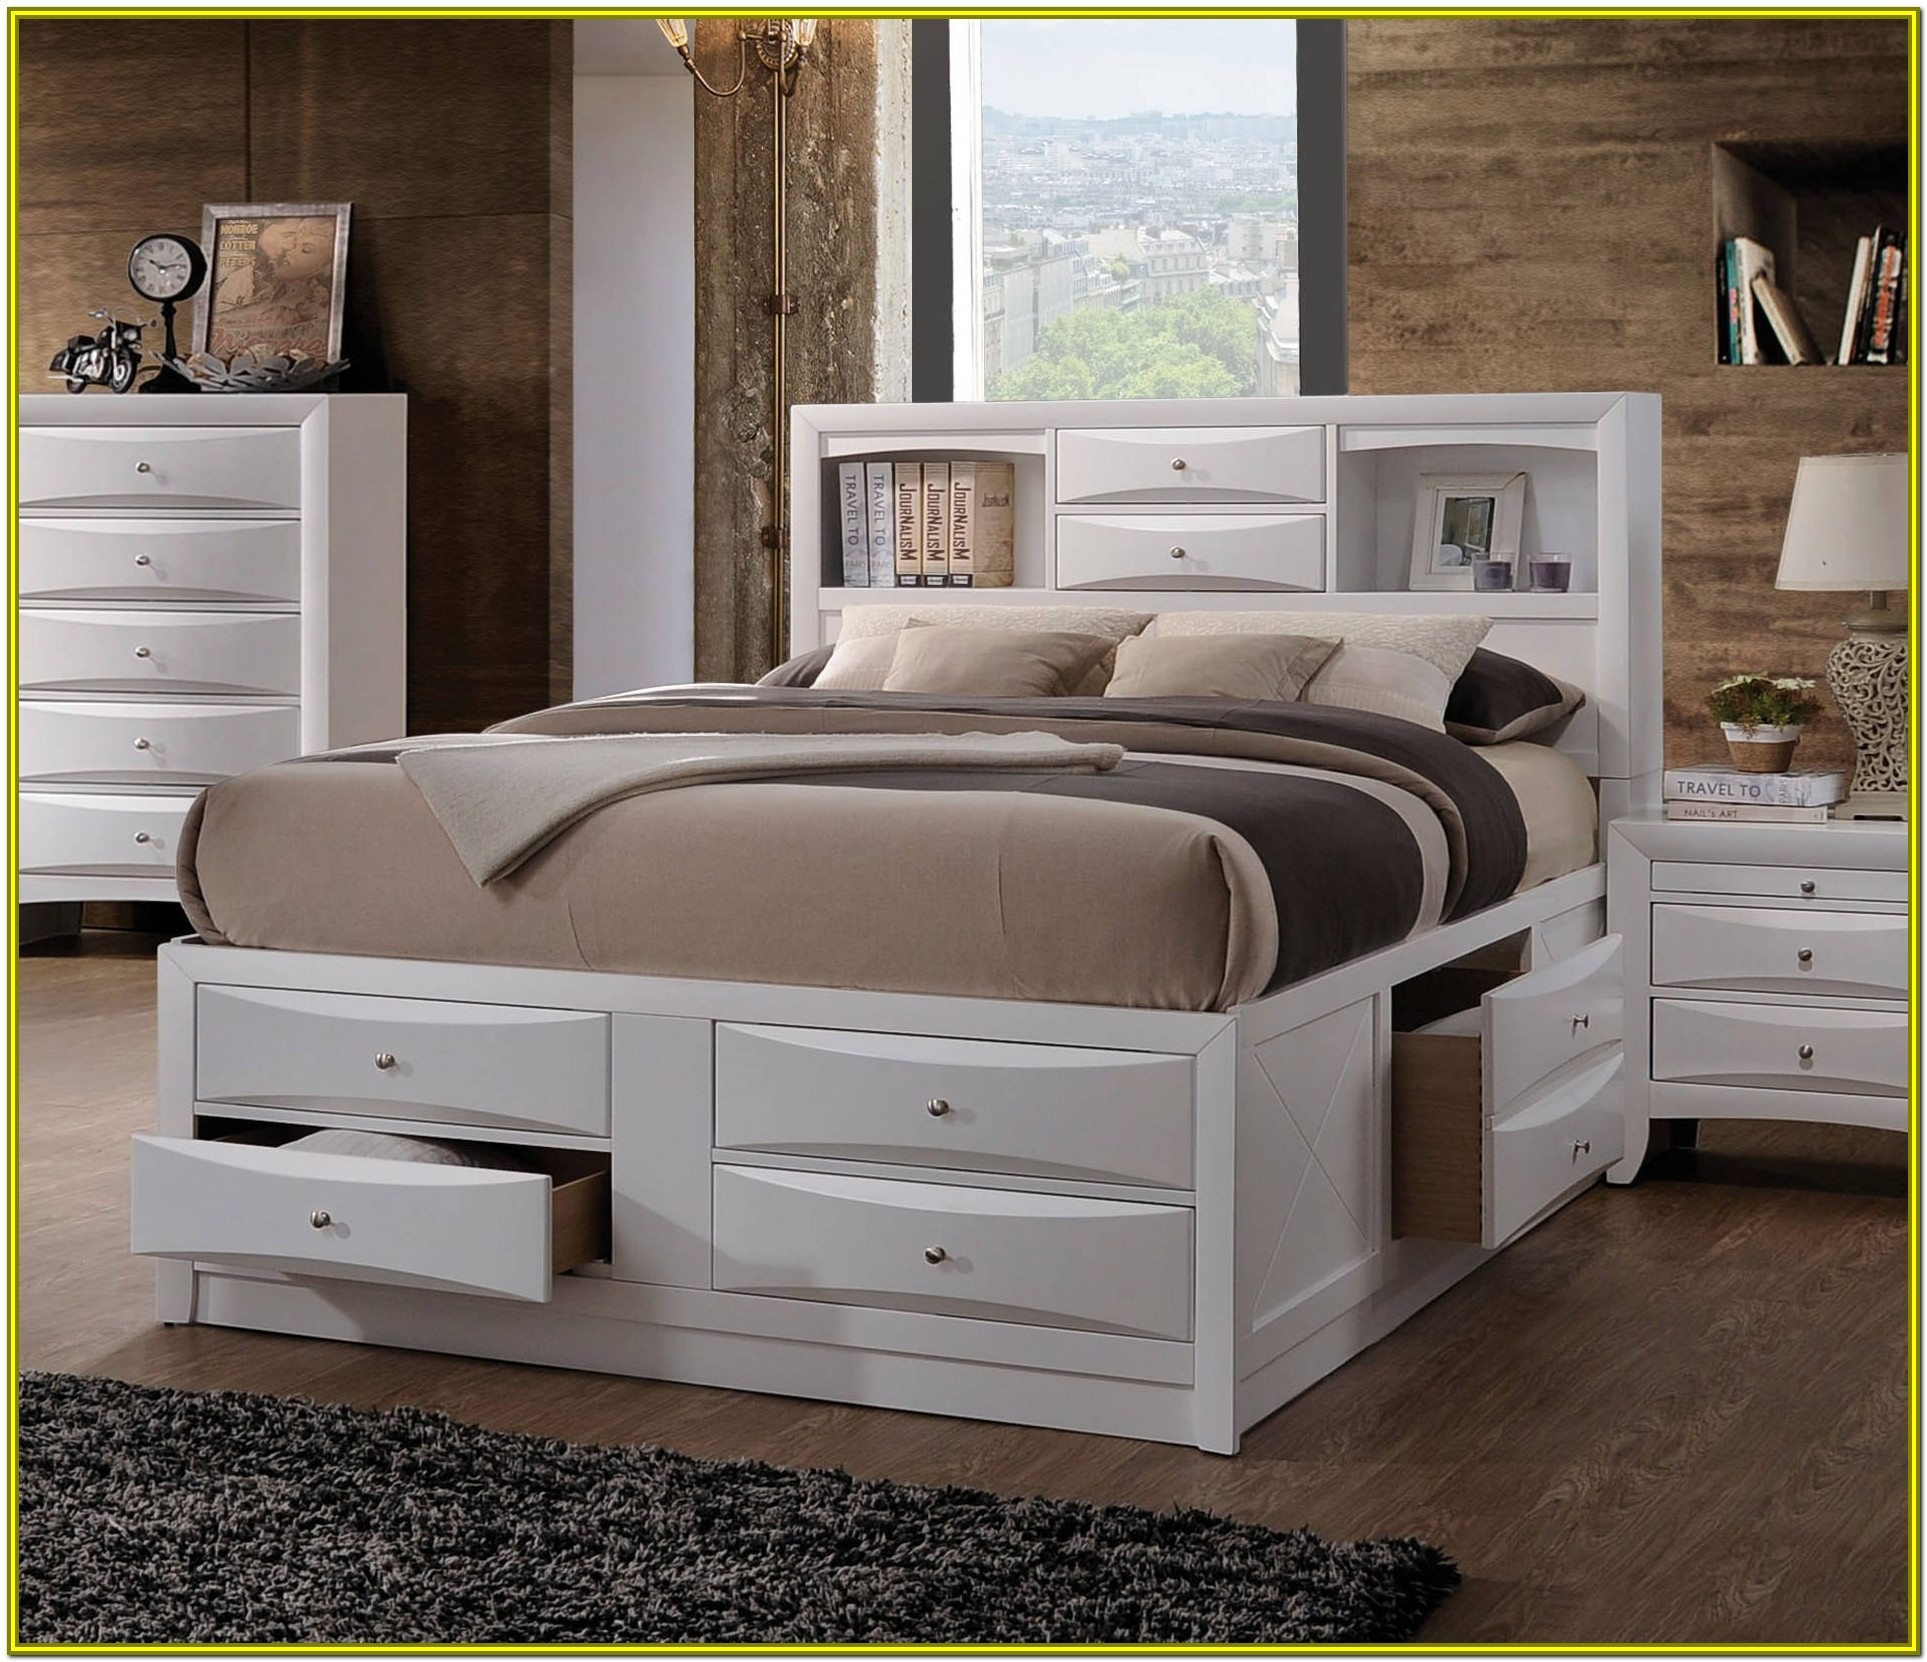 Platform Bed With Drawers Visualhunt, King Pedestal Bed With Drawers